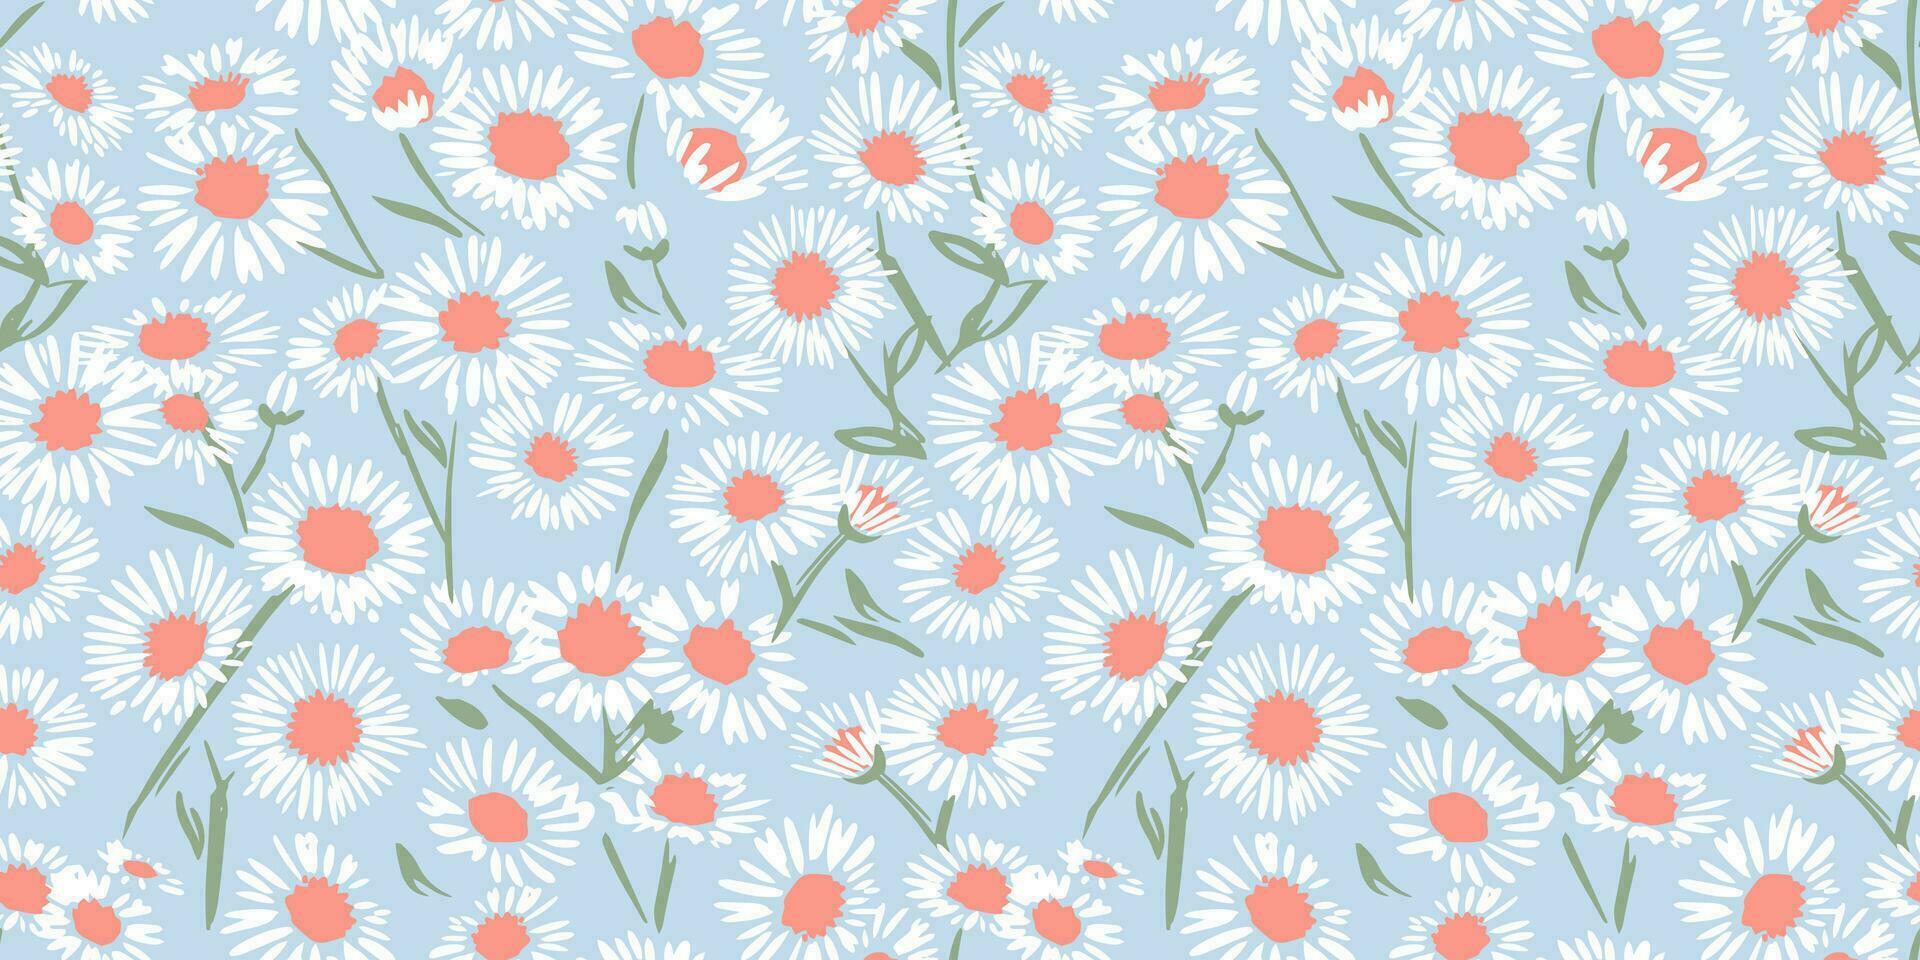 Cute white flowerschamomiles seamless pattern on a blue background. Vector hand drawn sketch. Ditsy floral. Collage contemporary print. Design ornament for fabric, interior decor, textile, wallpaper